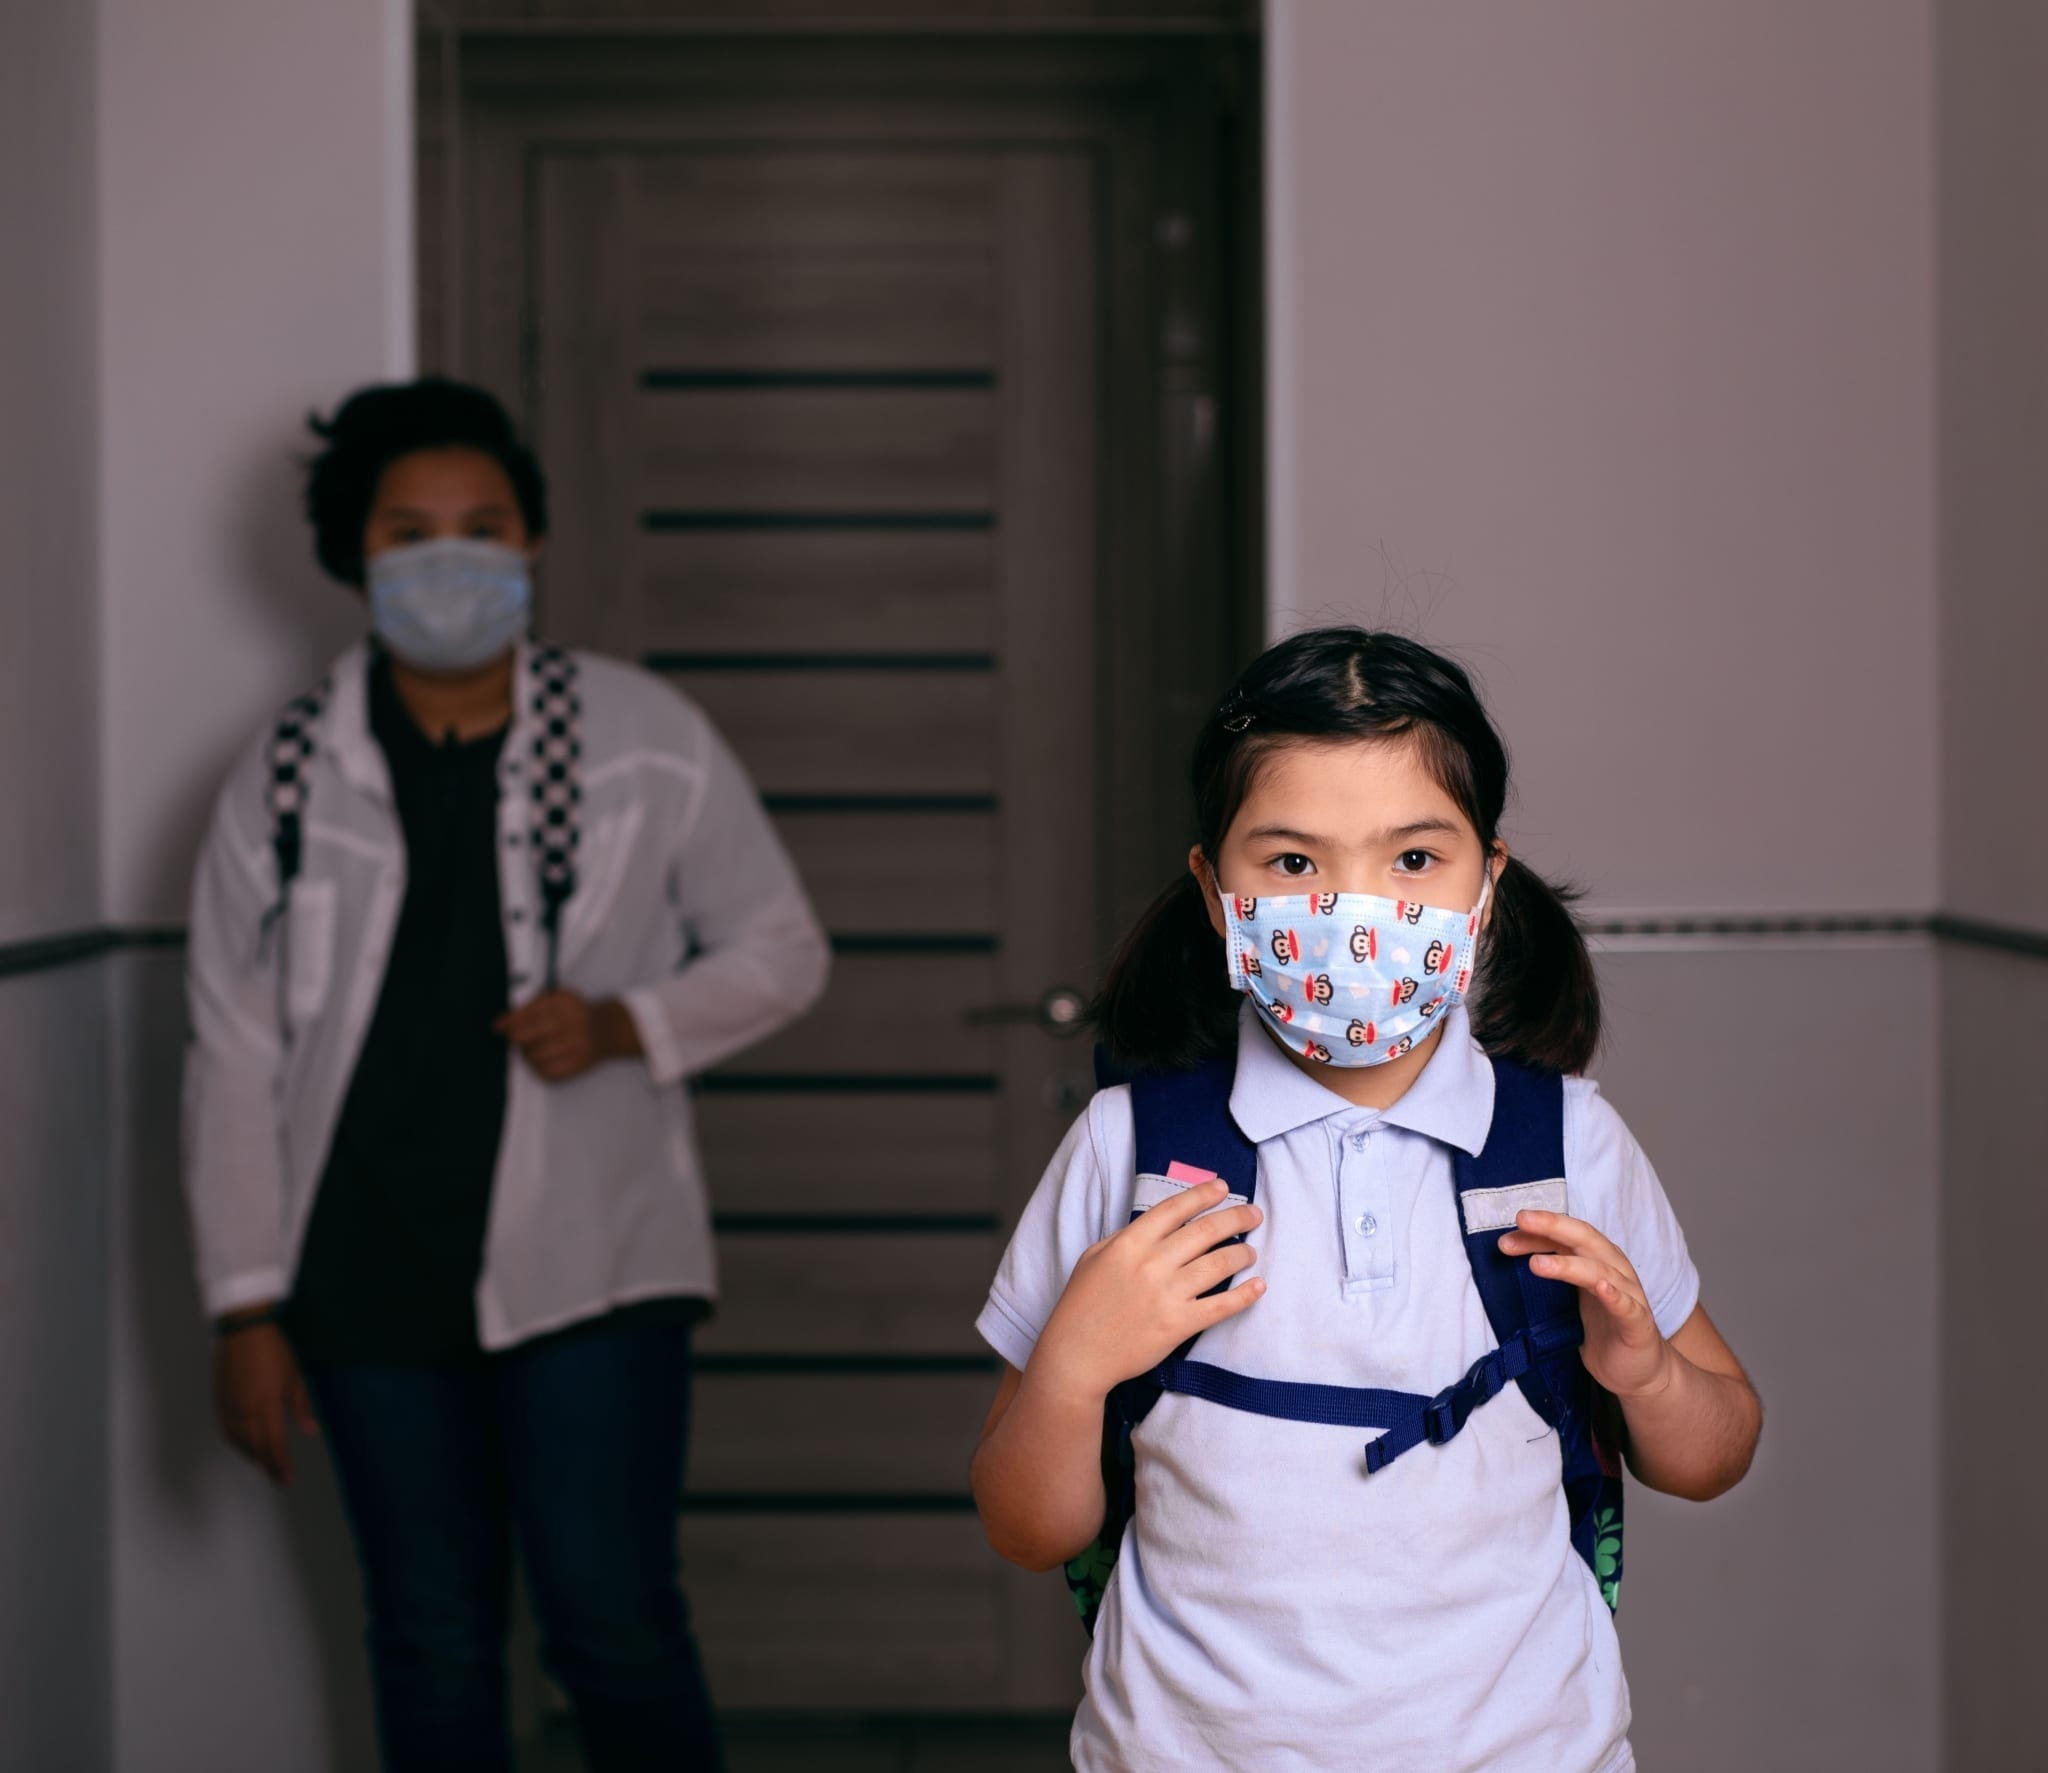 Child wearing a face mask and backpack while mother stands behind her with a face mask on